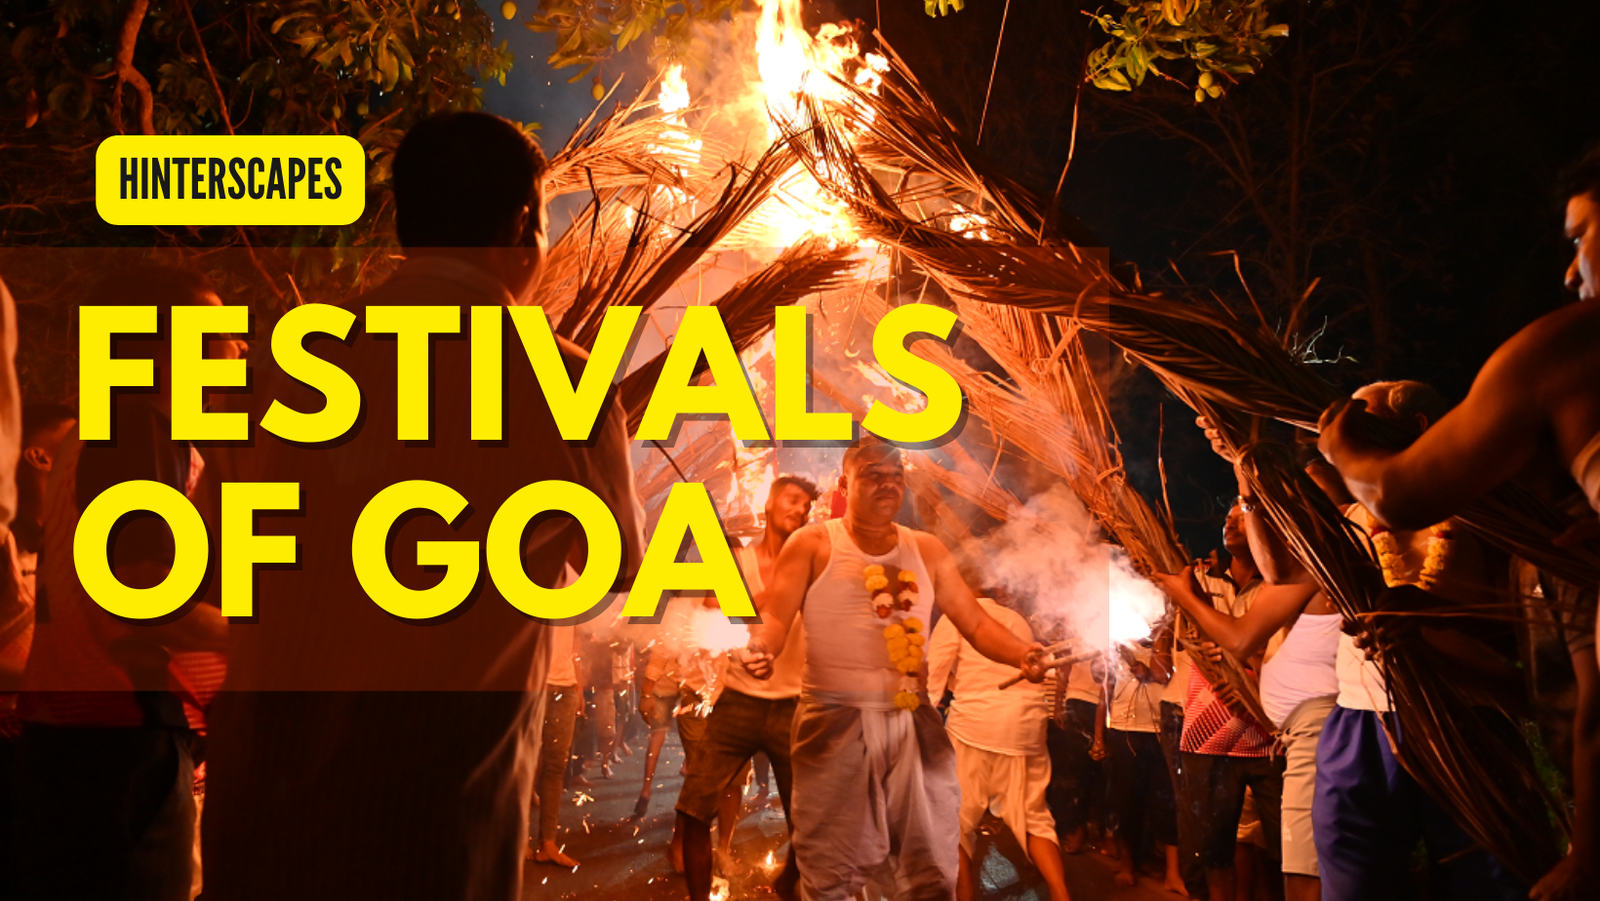 14 Unique Festivals of Goa that You Need to Experience on Your Next Goa Vacation